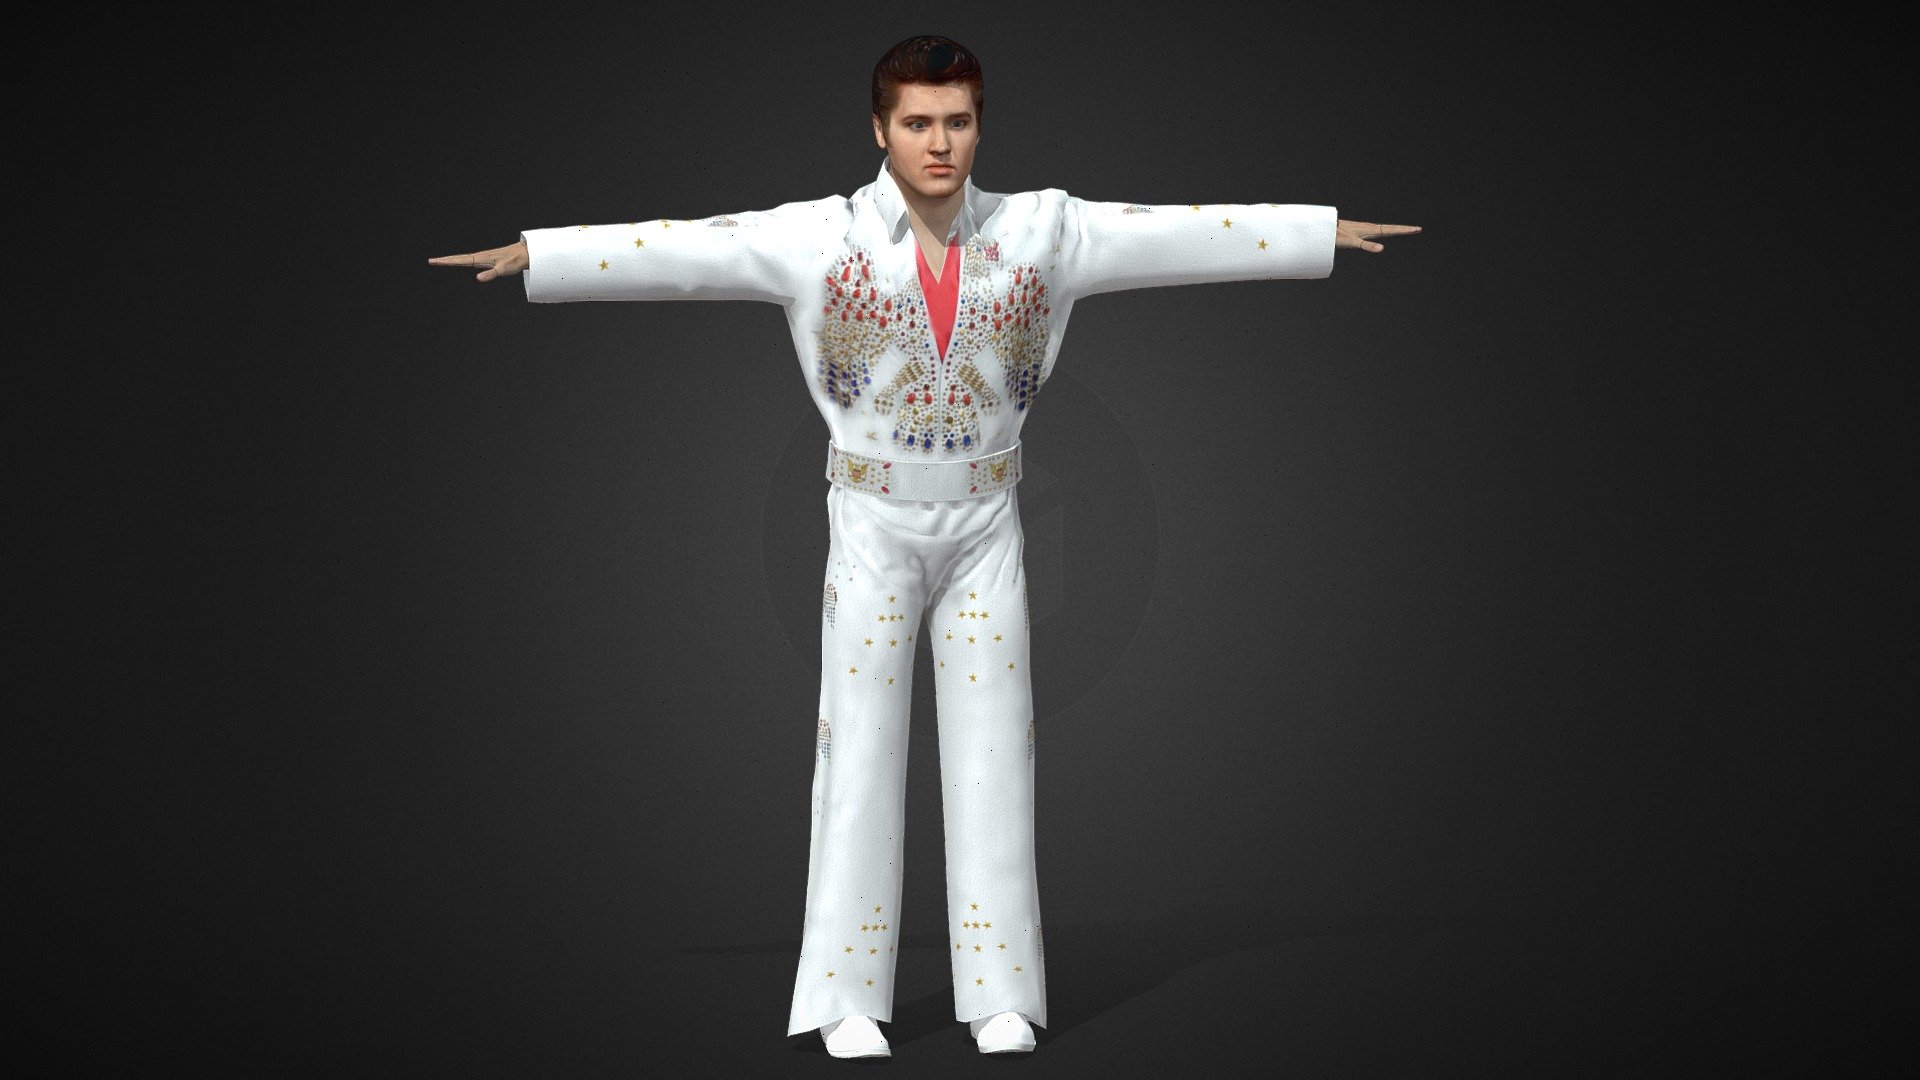 Custom 3D Model of Elvis Presley

I can create 3D models of all famous artists or custom characters. You can send me a message on Instagram if you’re interested –&gt; https://www.instagram.com/valone.future/ - Elvis Presley - 3D model by ValOne 3d model